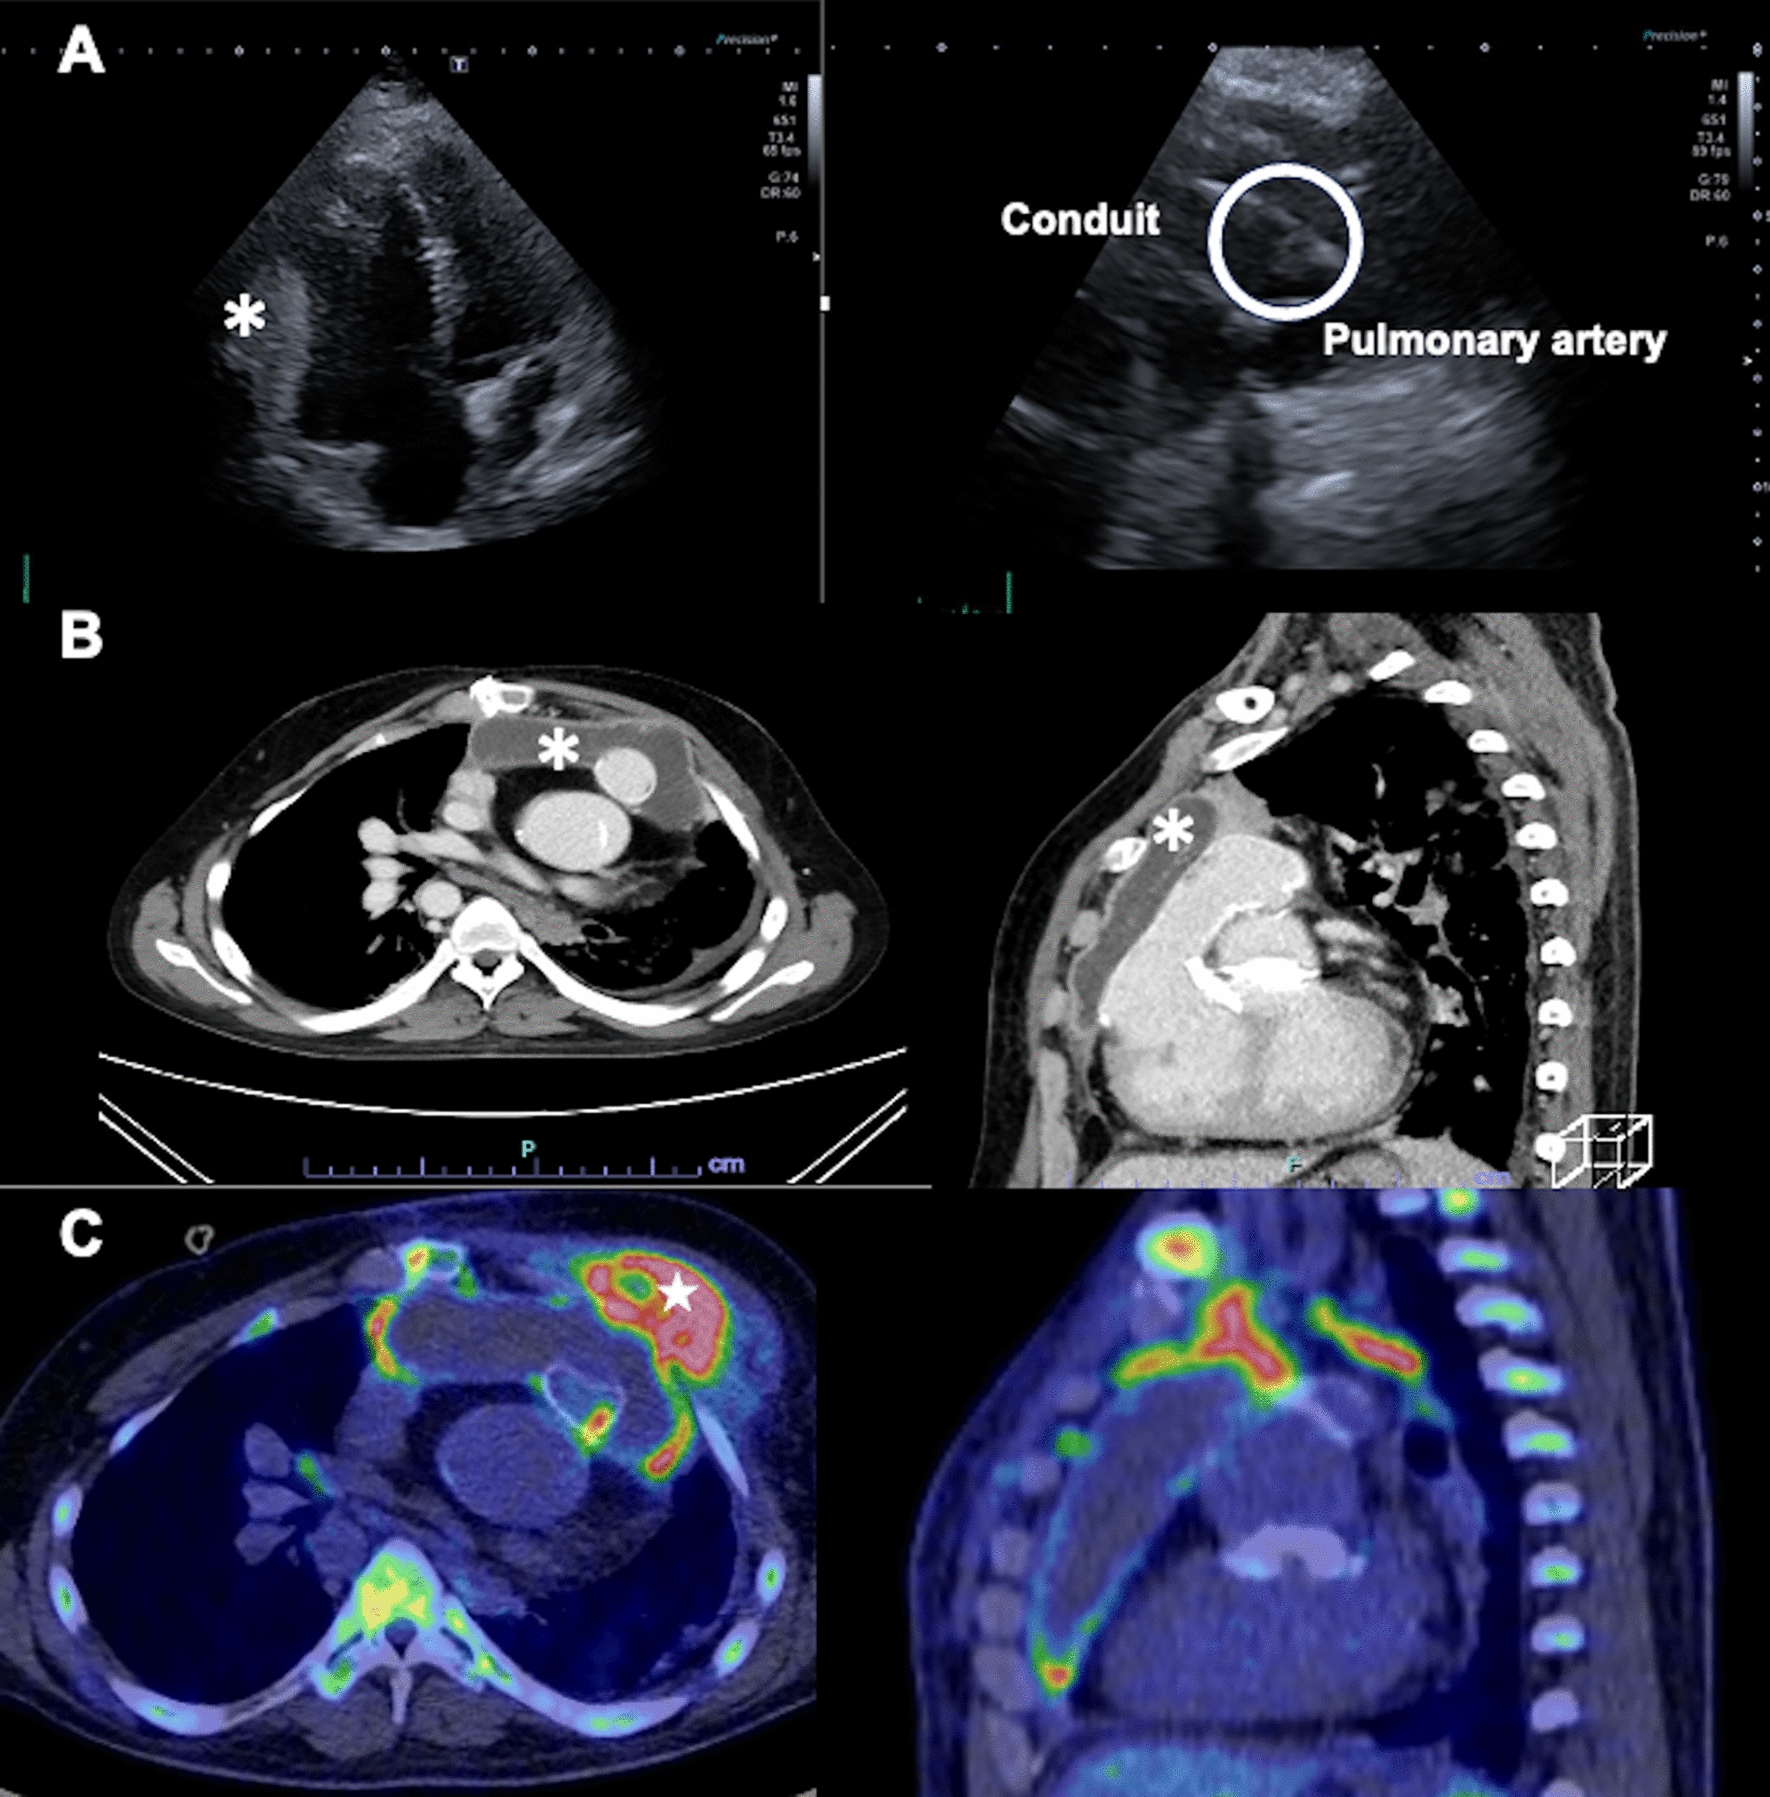 Perforation of the chest wall from bioprosthetic pulmonary valve endocarditis